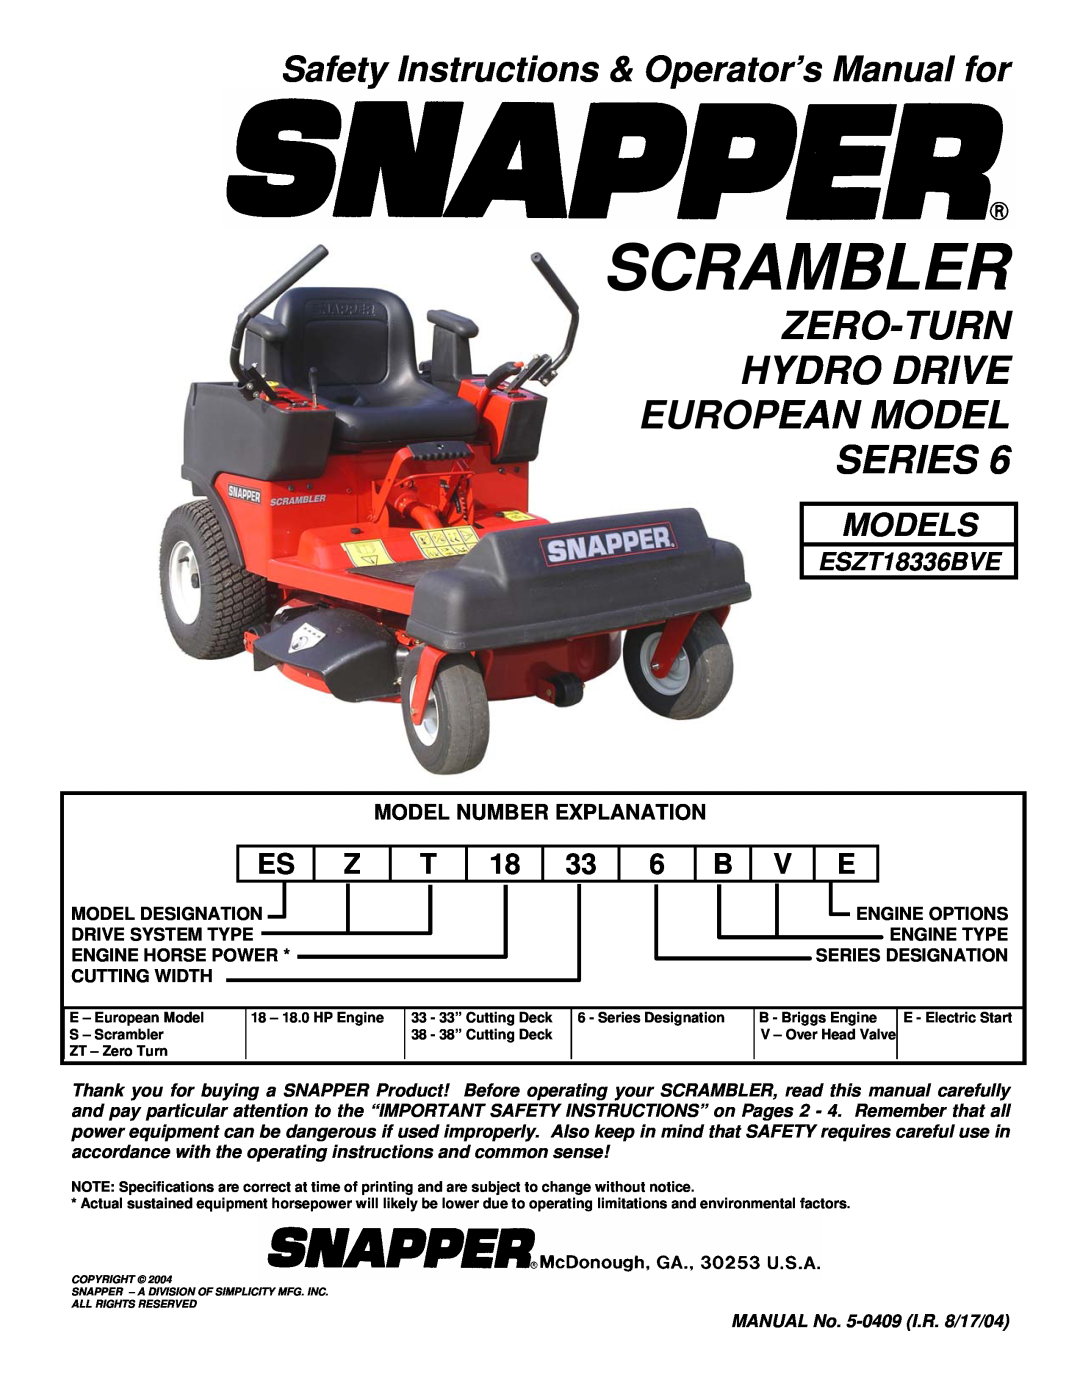 Snapper ESZT18336BVE important safety instructions Safety Instructions & Operator’s Manual for, Model Number Explanation 